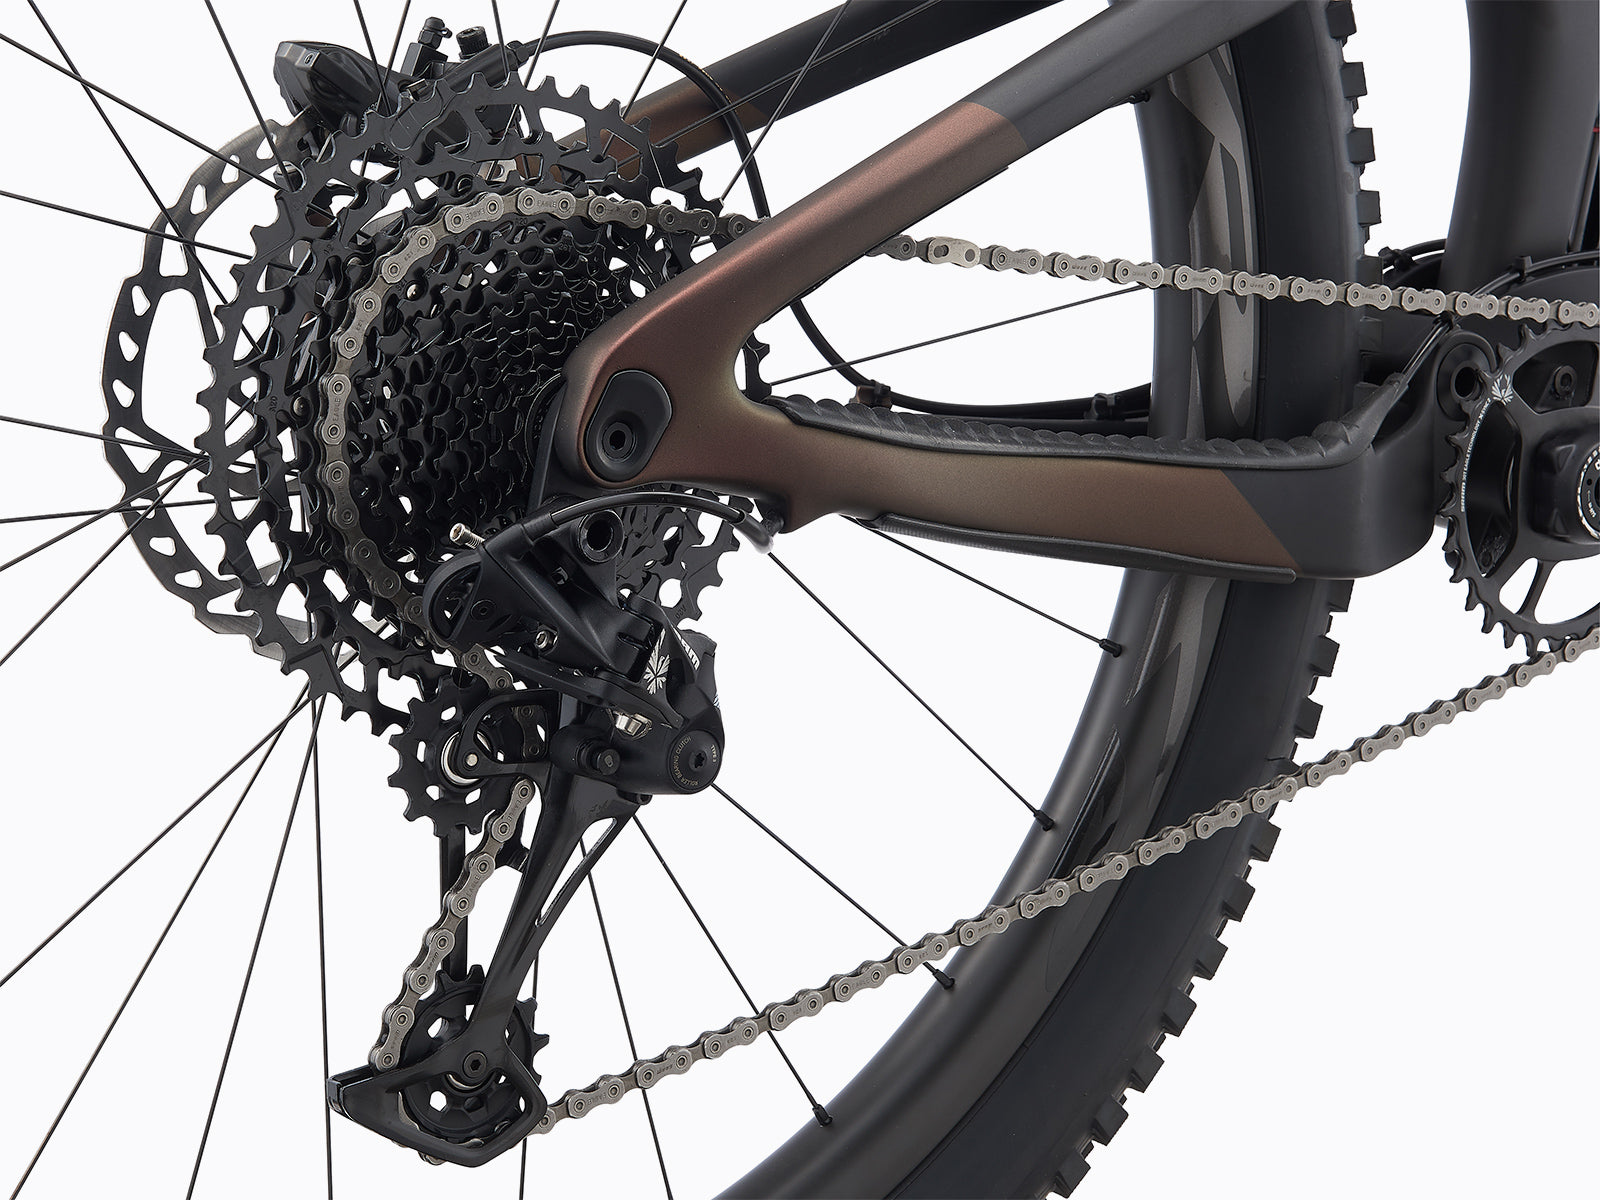 Image features a Giant Trance x advanced Pro 29 2, a fat bike from giants trail bike collection